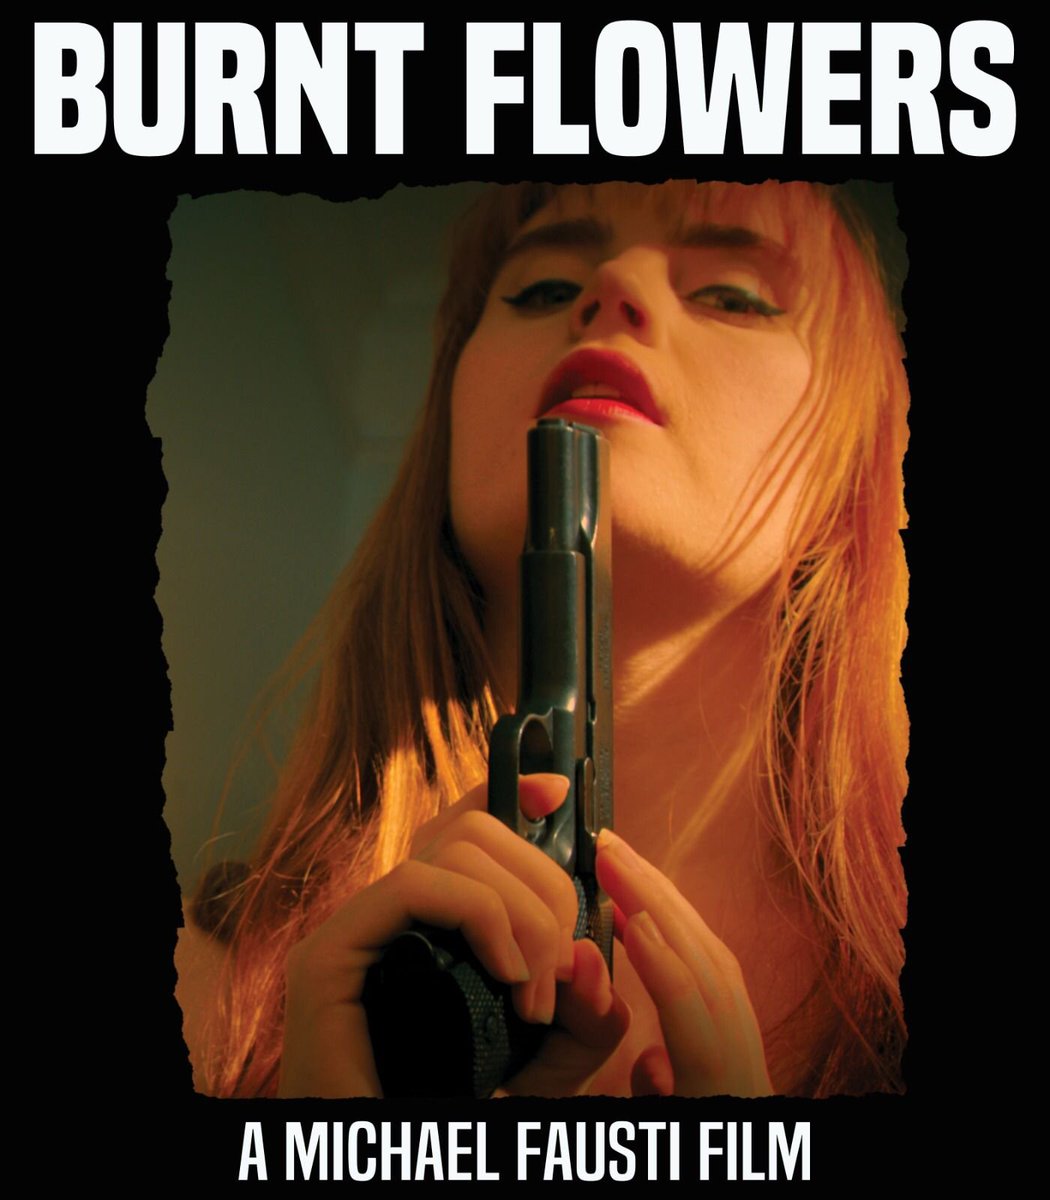 🎥🌹 Don’t miss your chance to snag the limited edition t-shirt for the #IndieFilm Burnt Flowers! 🔥🥀

⏰ Pre-order closes 23:59 8th Dec 2023

#BurntFlowers #LimitedEdition #FilmLovers #MustHave #GetItWhileYouCan #MovieMerch #FilmFanatics #TeeShirt #SupportIndieFilm #FilmMerch